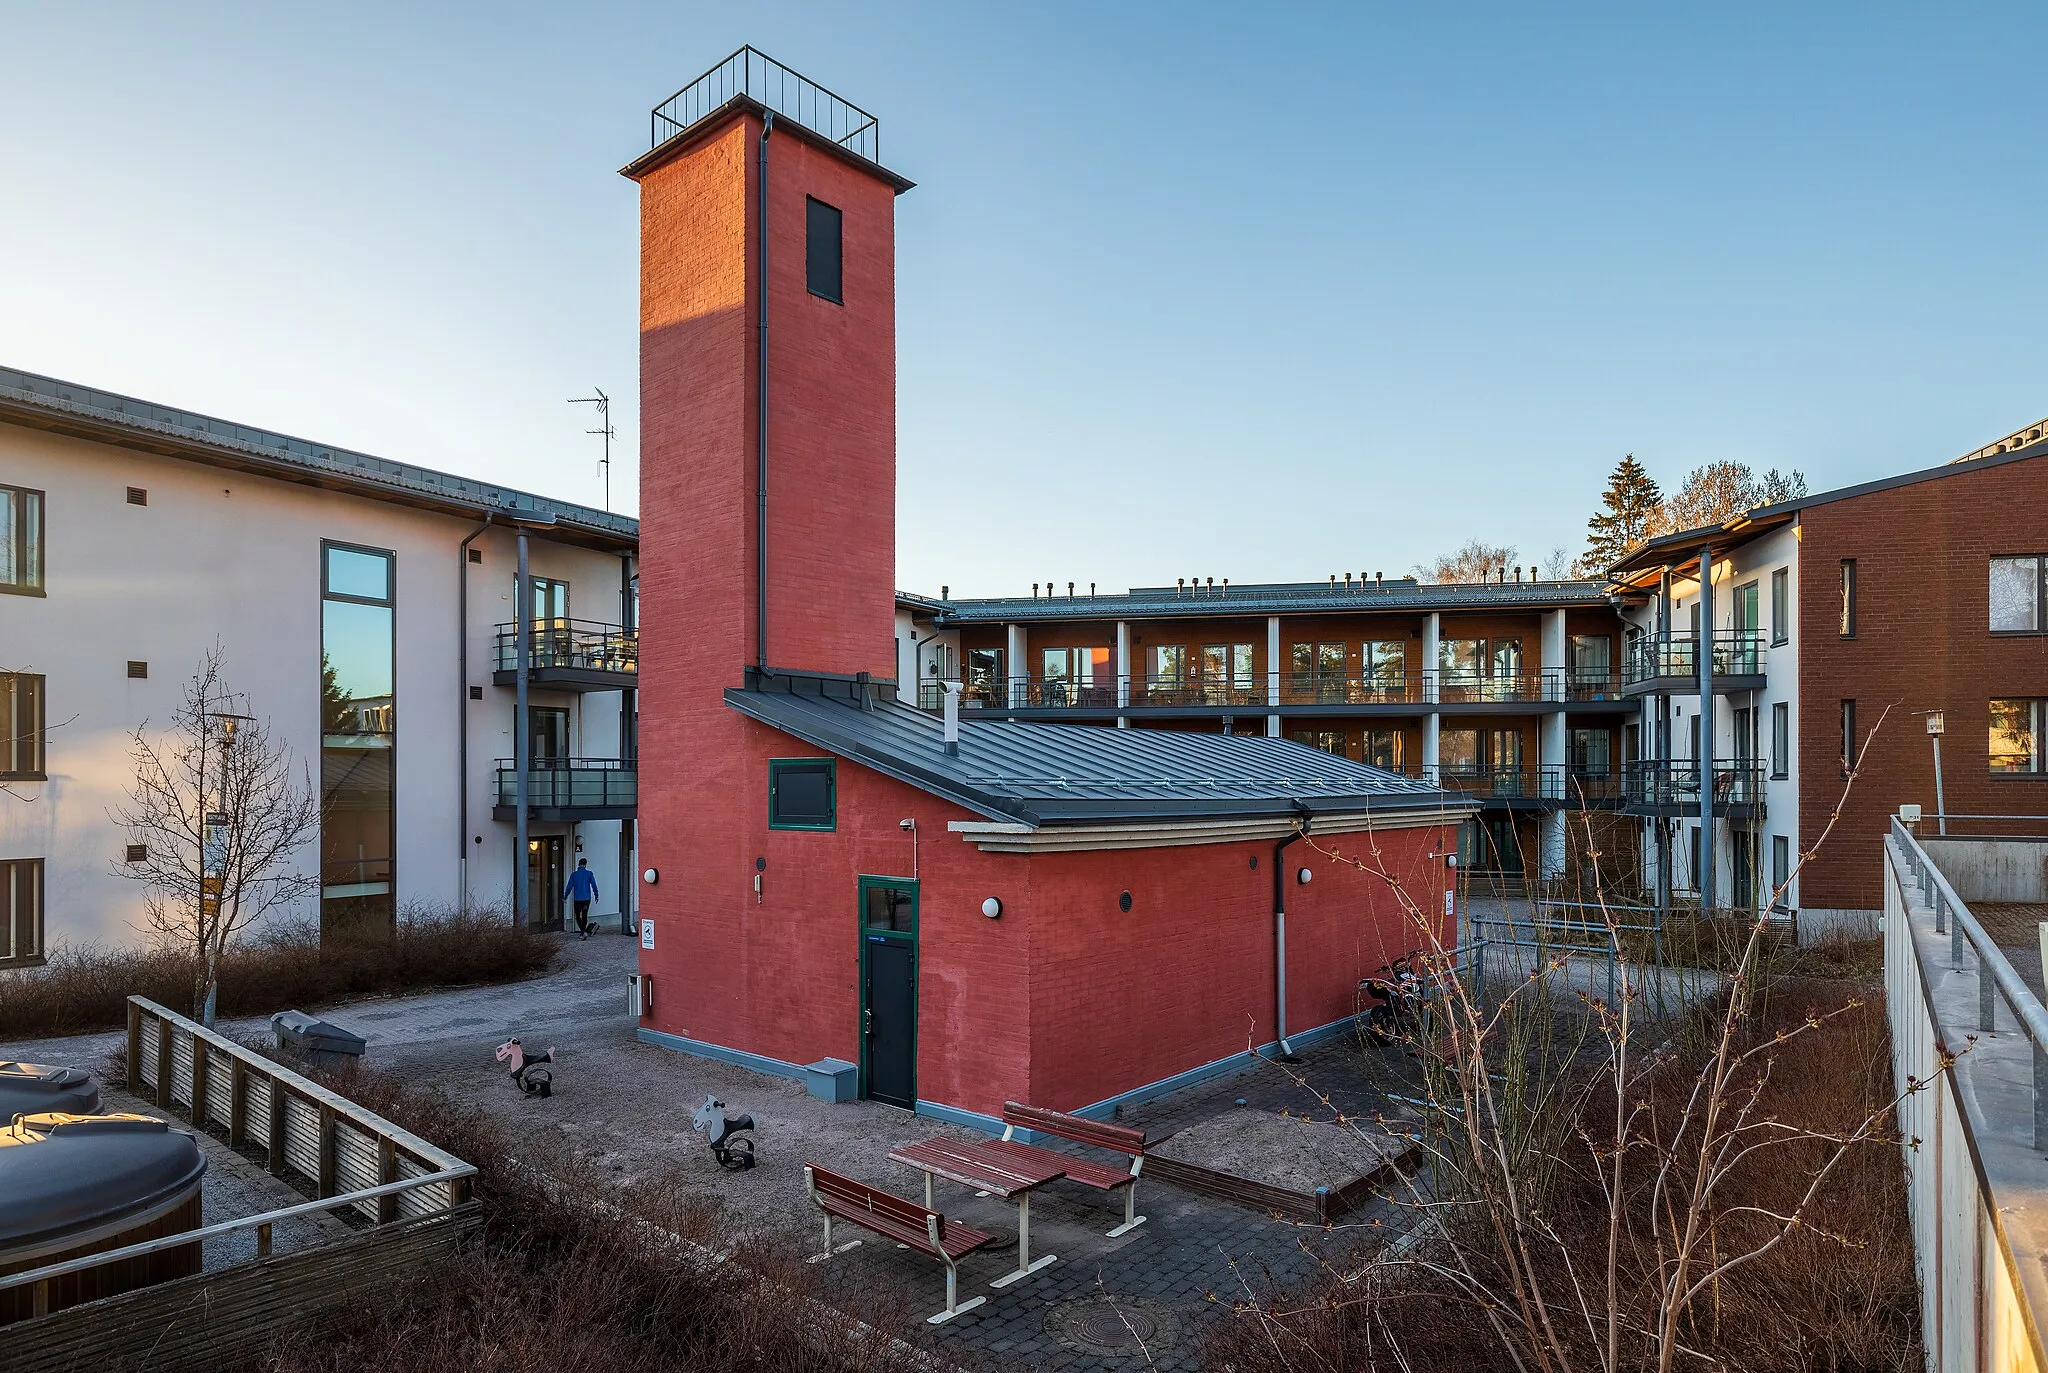 Photo showing: The former fire department building of Palokunnanmäki 1 in Tikkurila, Vantaa, Finland in 2022 April. Novadays, the former fire department, built in 1939, happens to be located in the center of a residential property built in 2009.